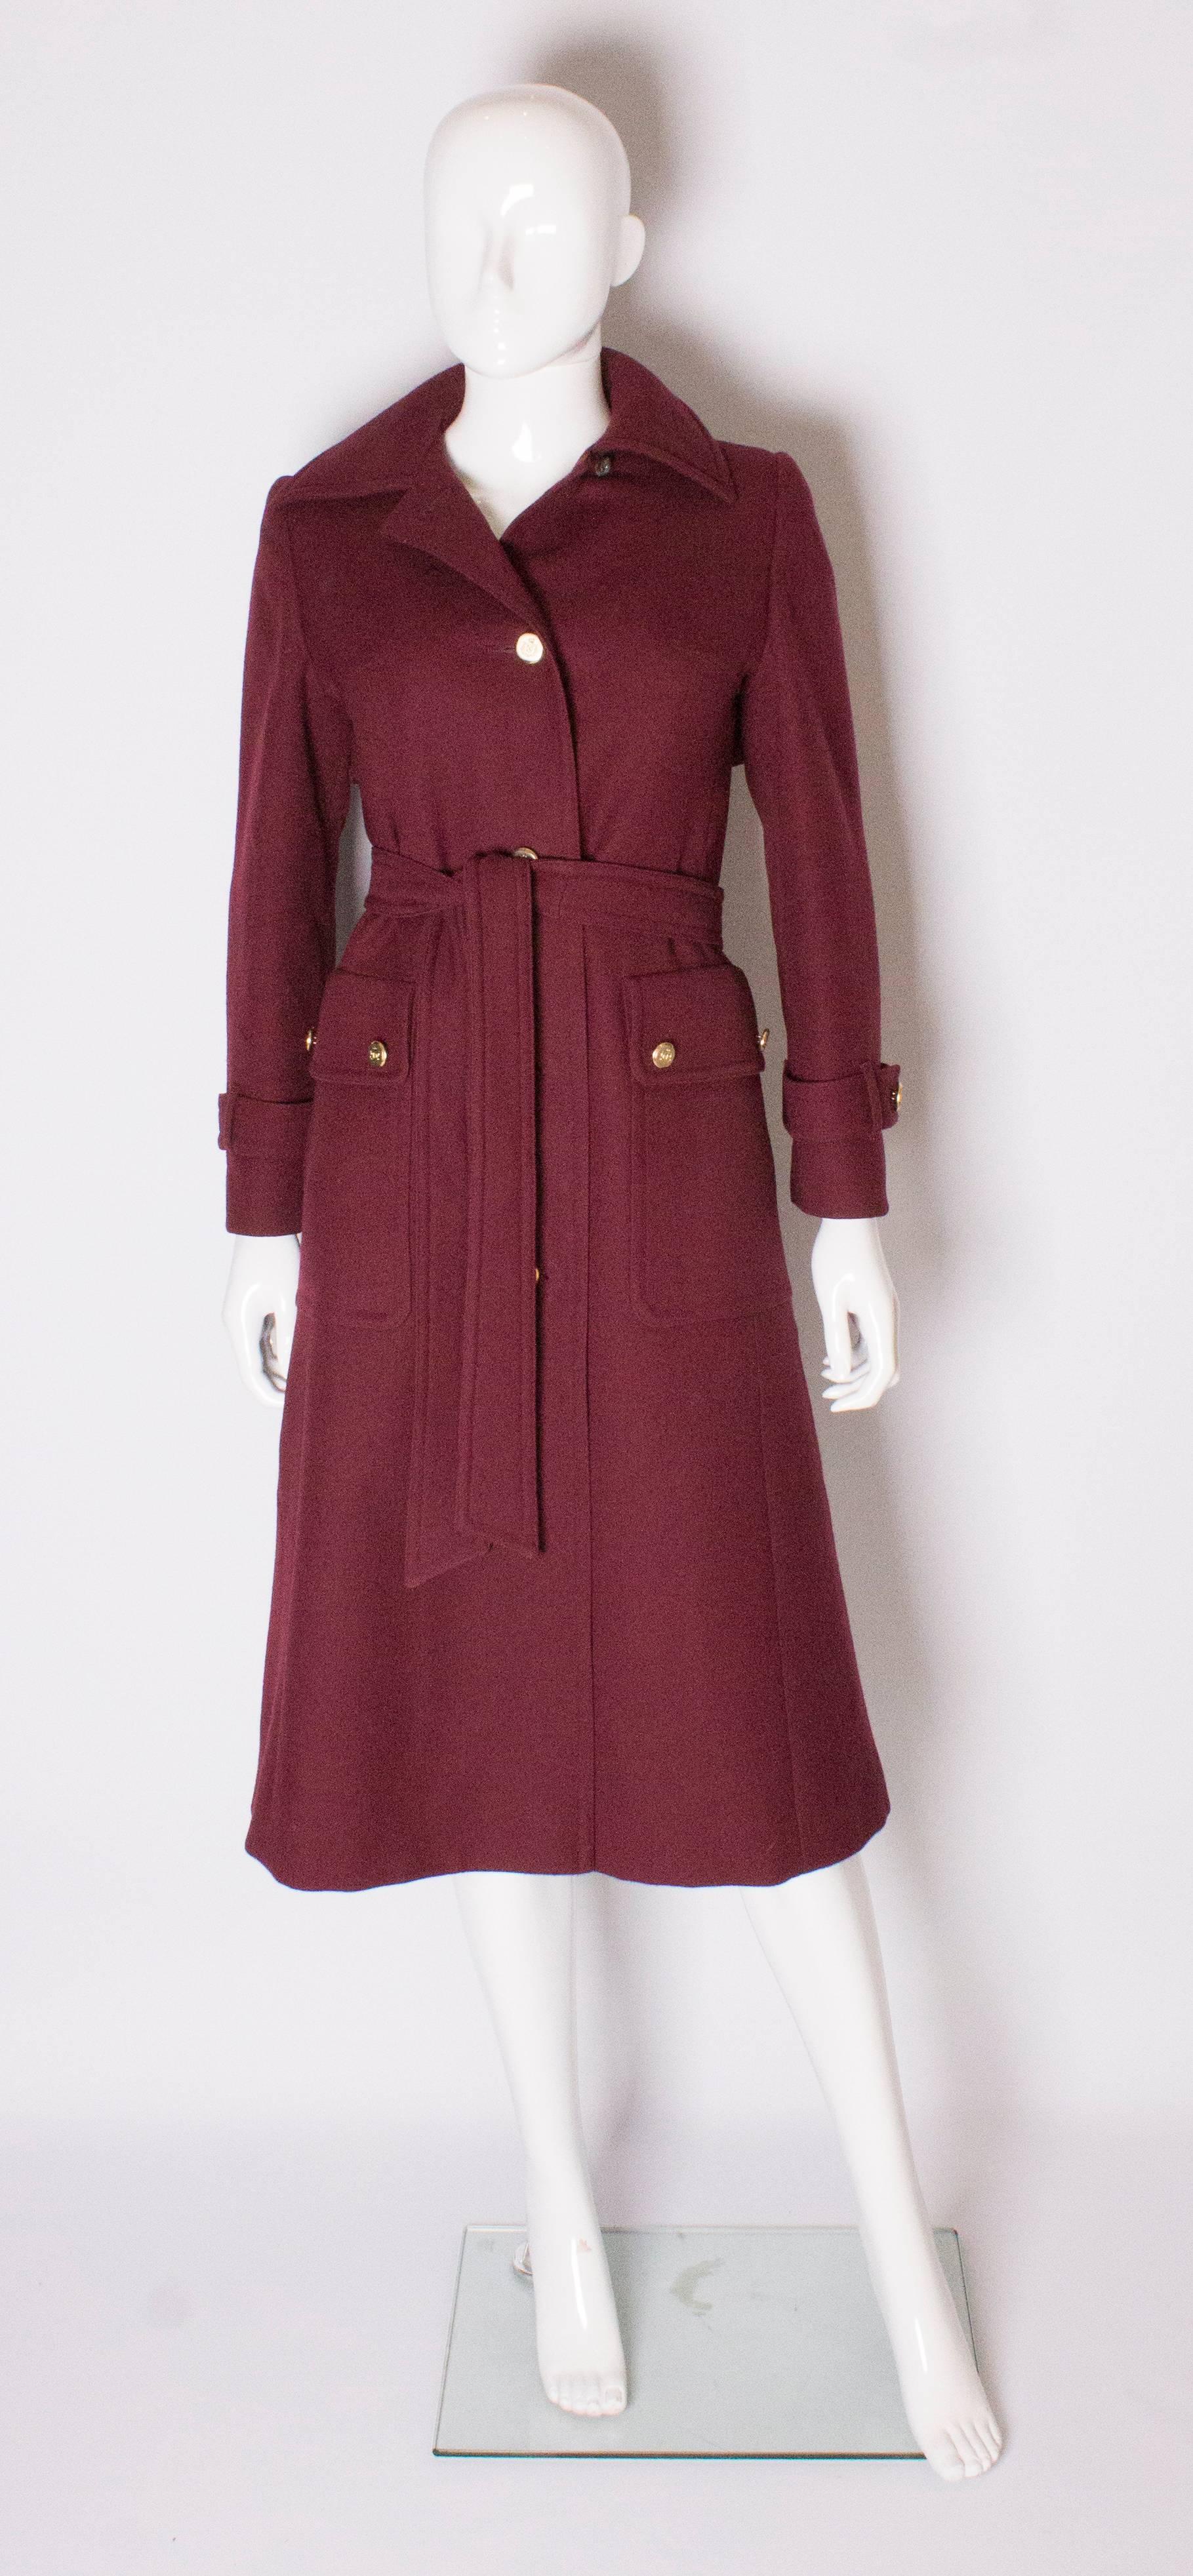 A great coat for Autumn /Winter by Aquascutum for Harrods. In a burgundy colour wool, the coat has a 4 button opening , two large pockets on the front and a self tie belt. It is fully lined.